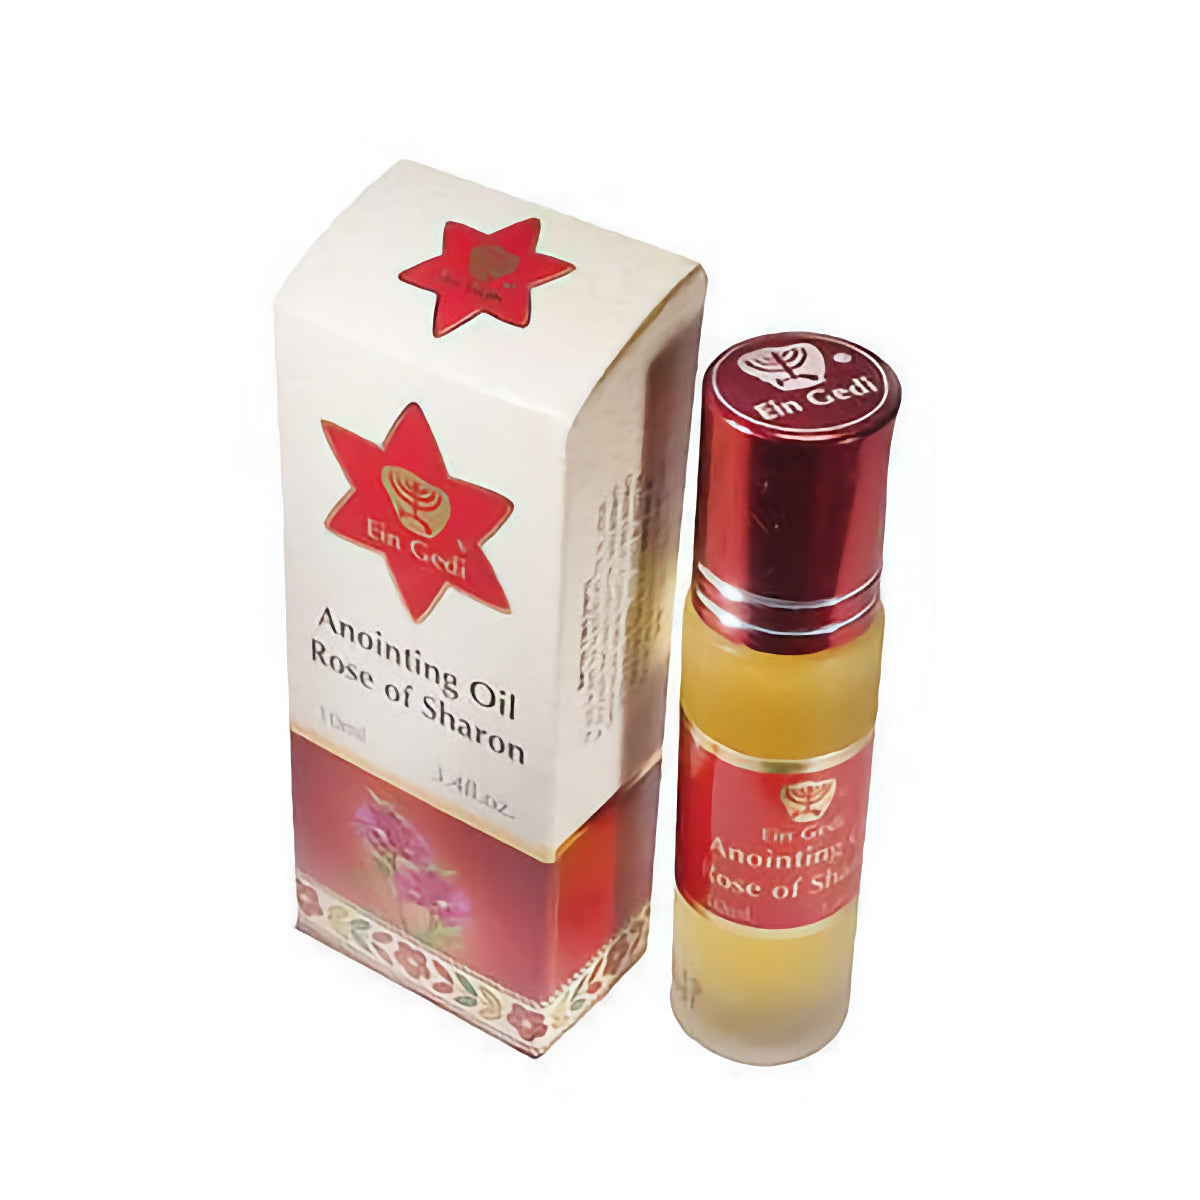 Roll On Anointing Oil Rose Of Sharon 10ml From Holyland Jerusalem